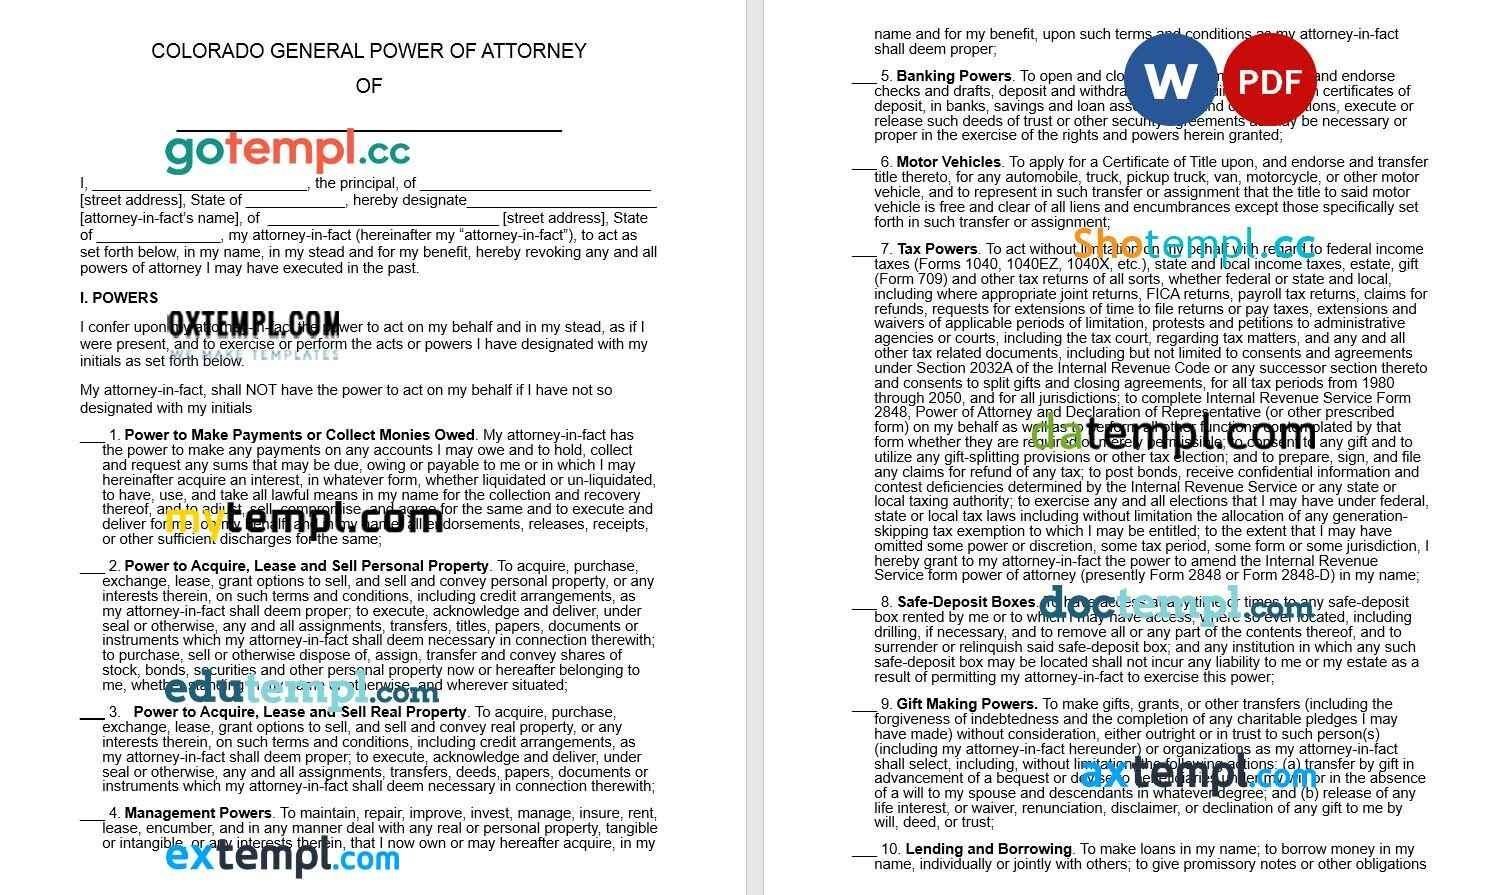 Colorado General Power of Attorney Template, fully editable